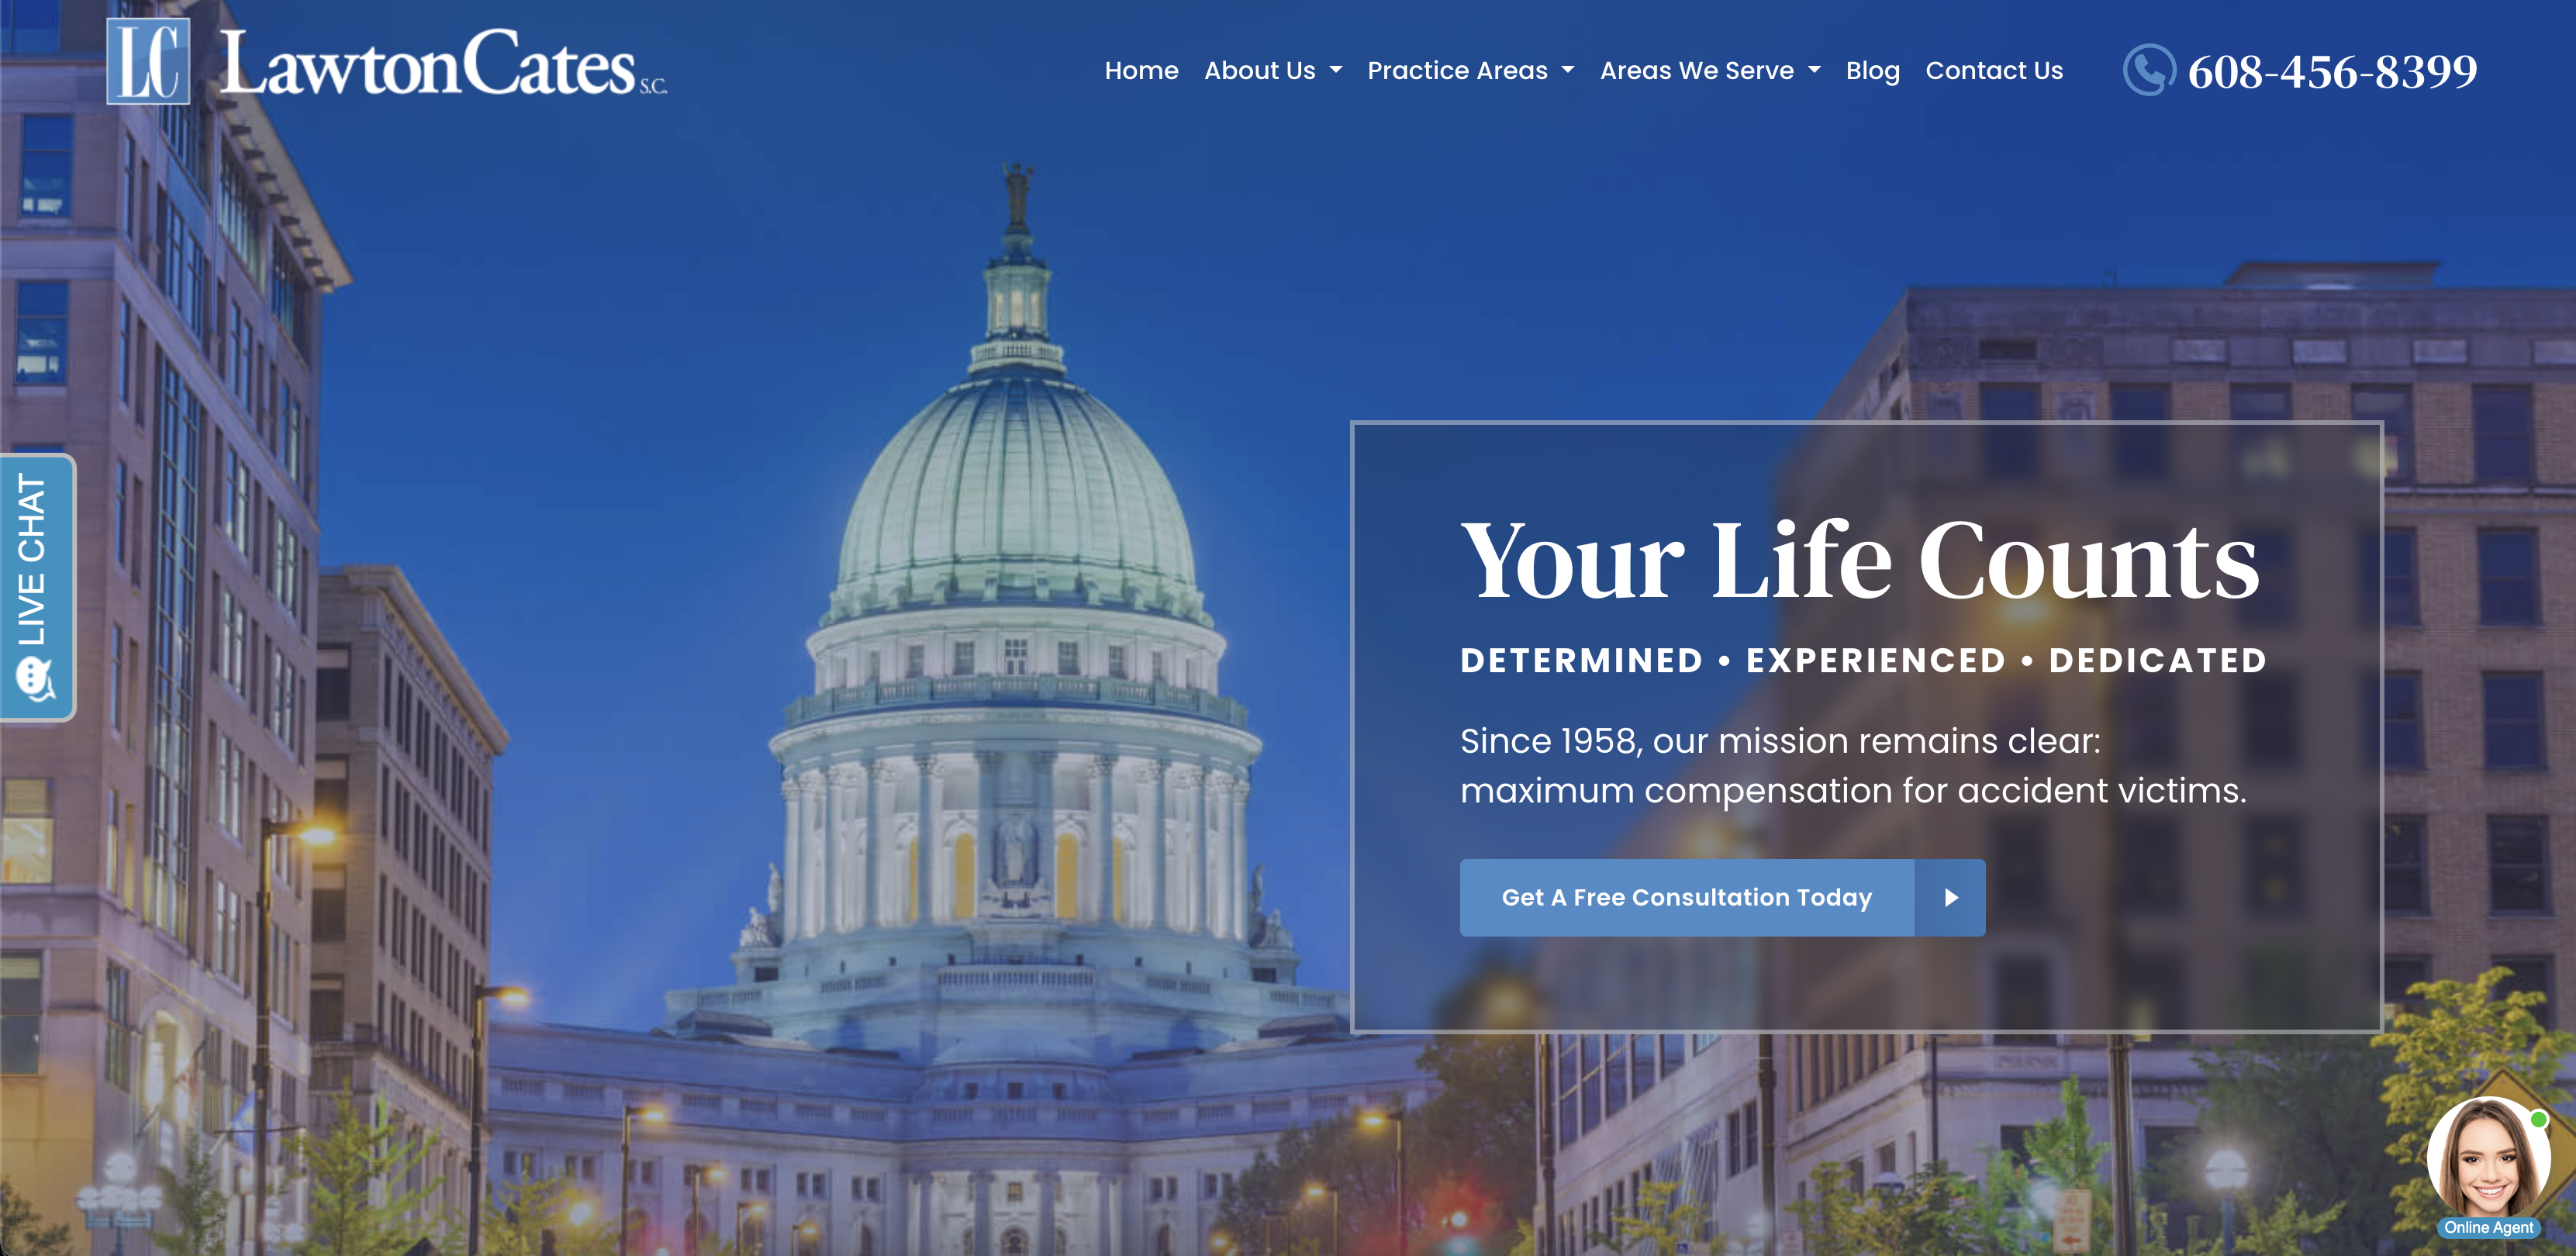 LawtonCates Redesigned Website